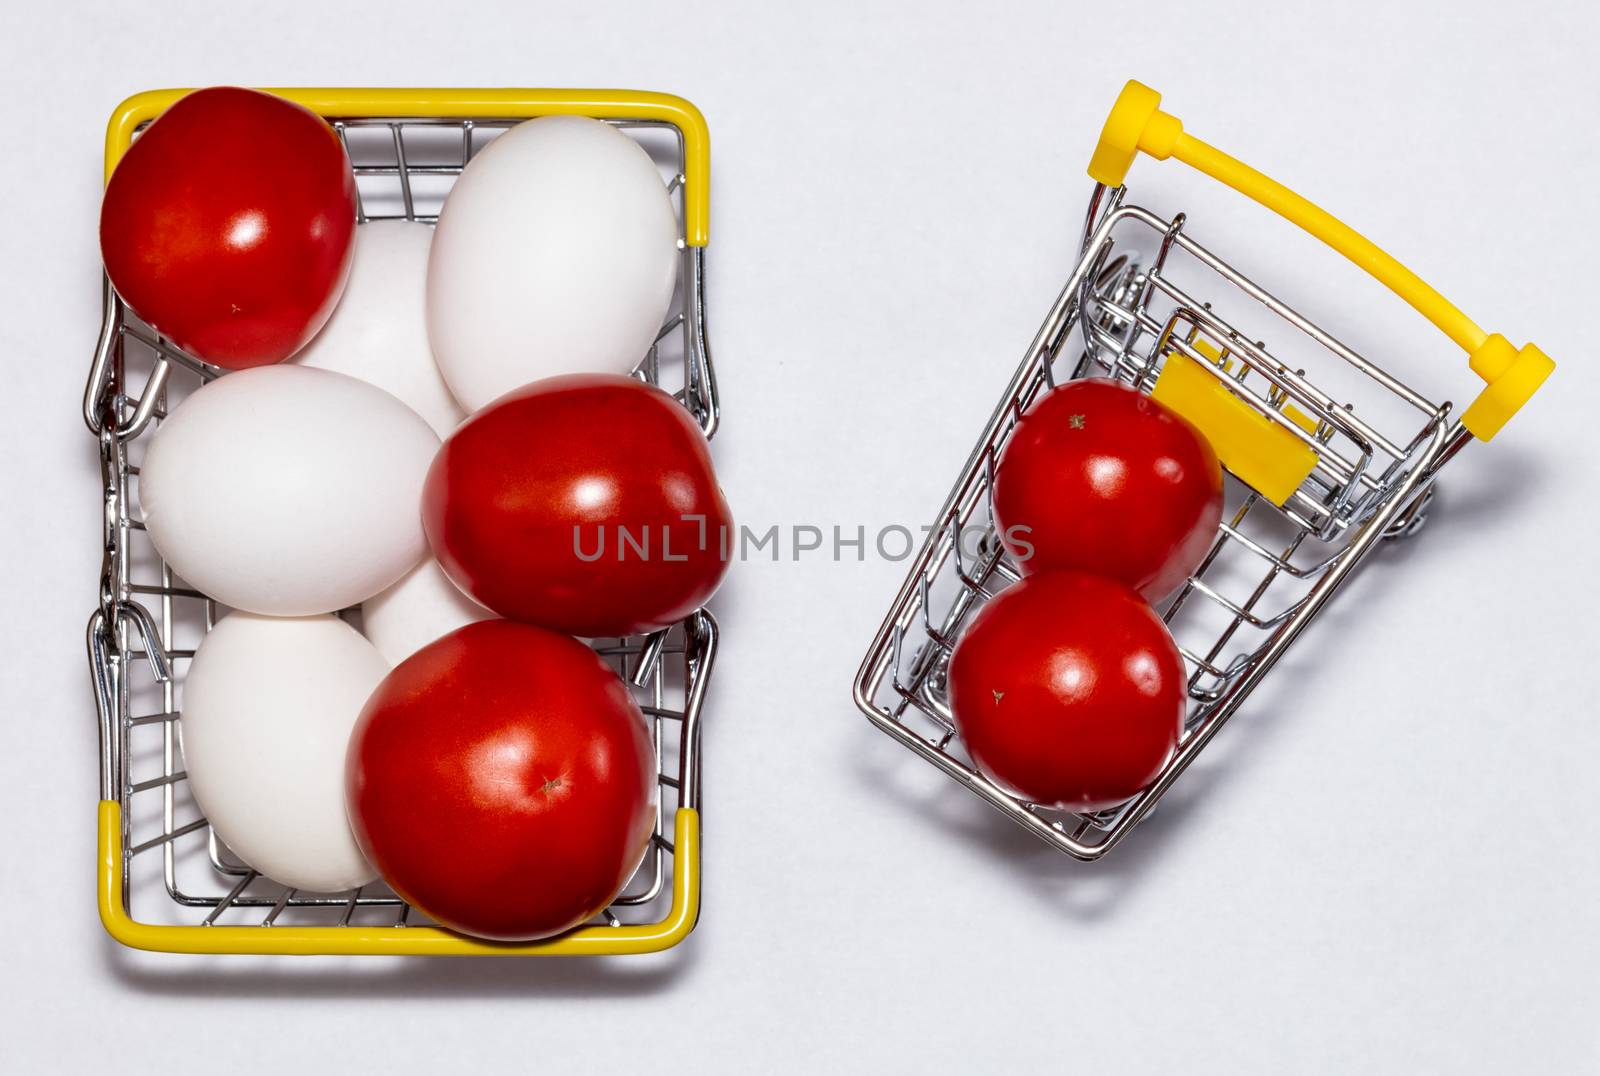 Fresh eggs and tomatoes in a shopping cart and a basket next to it. All mixed up. Top view. Shopping, purchasing, and food delivery concept. by DamantisZ